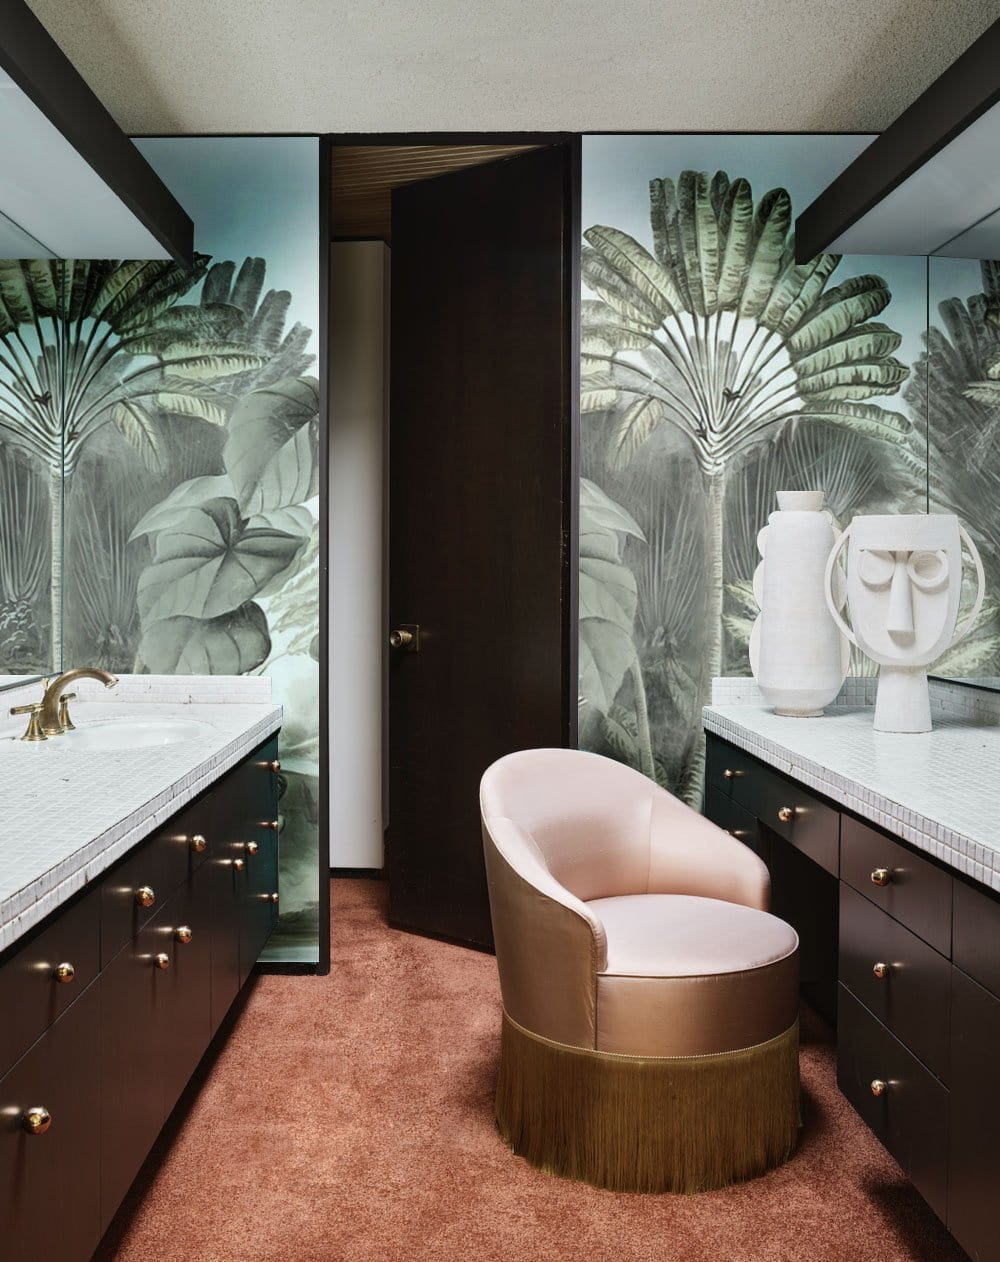 Wallpaper mural in the room featuring a vintage tropical forest scene